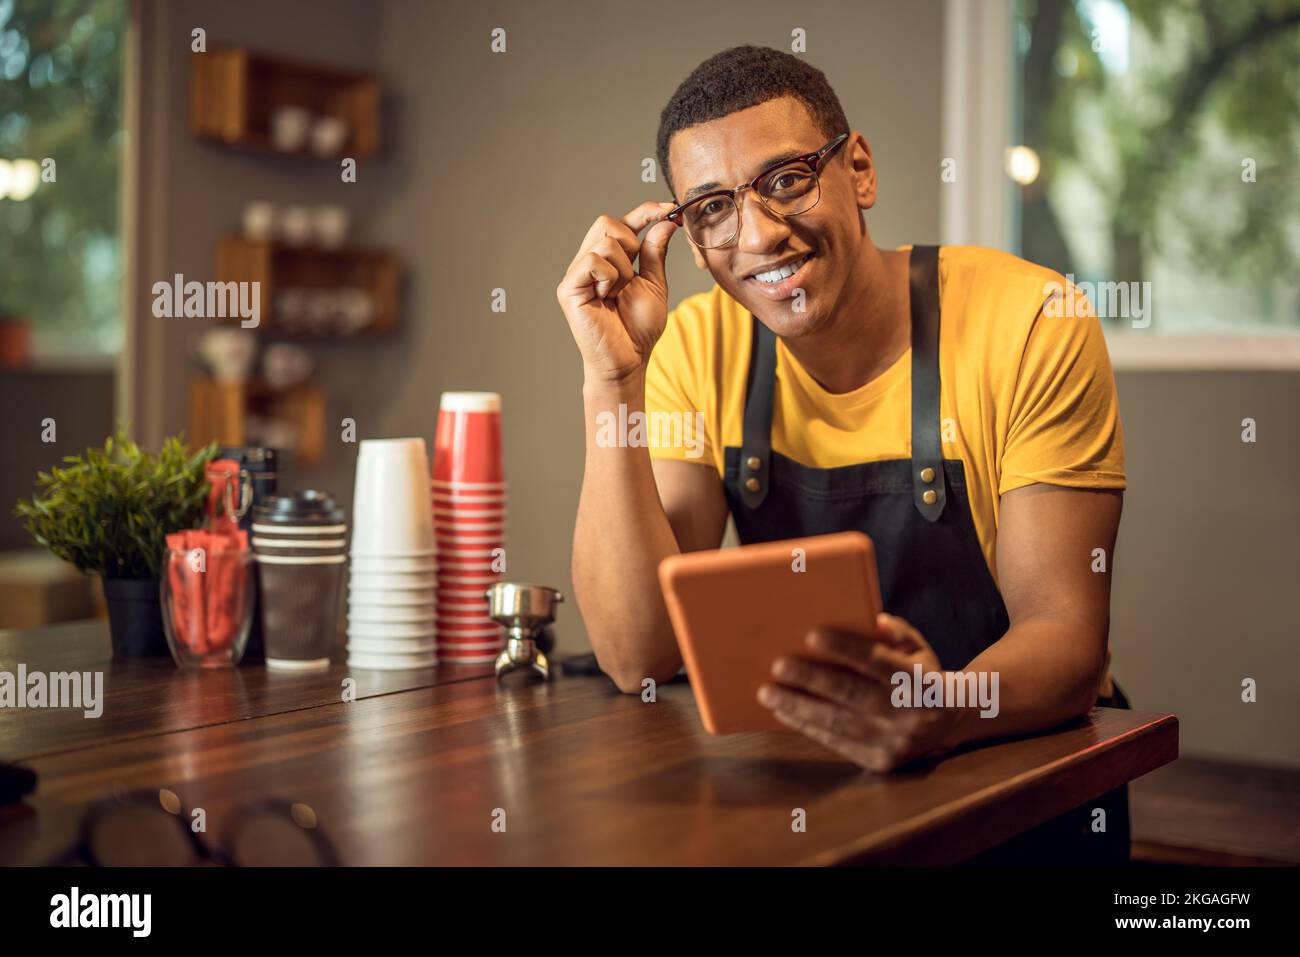 Smiling happy coffee shop worker seated at the table Stock Photo